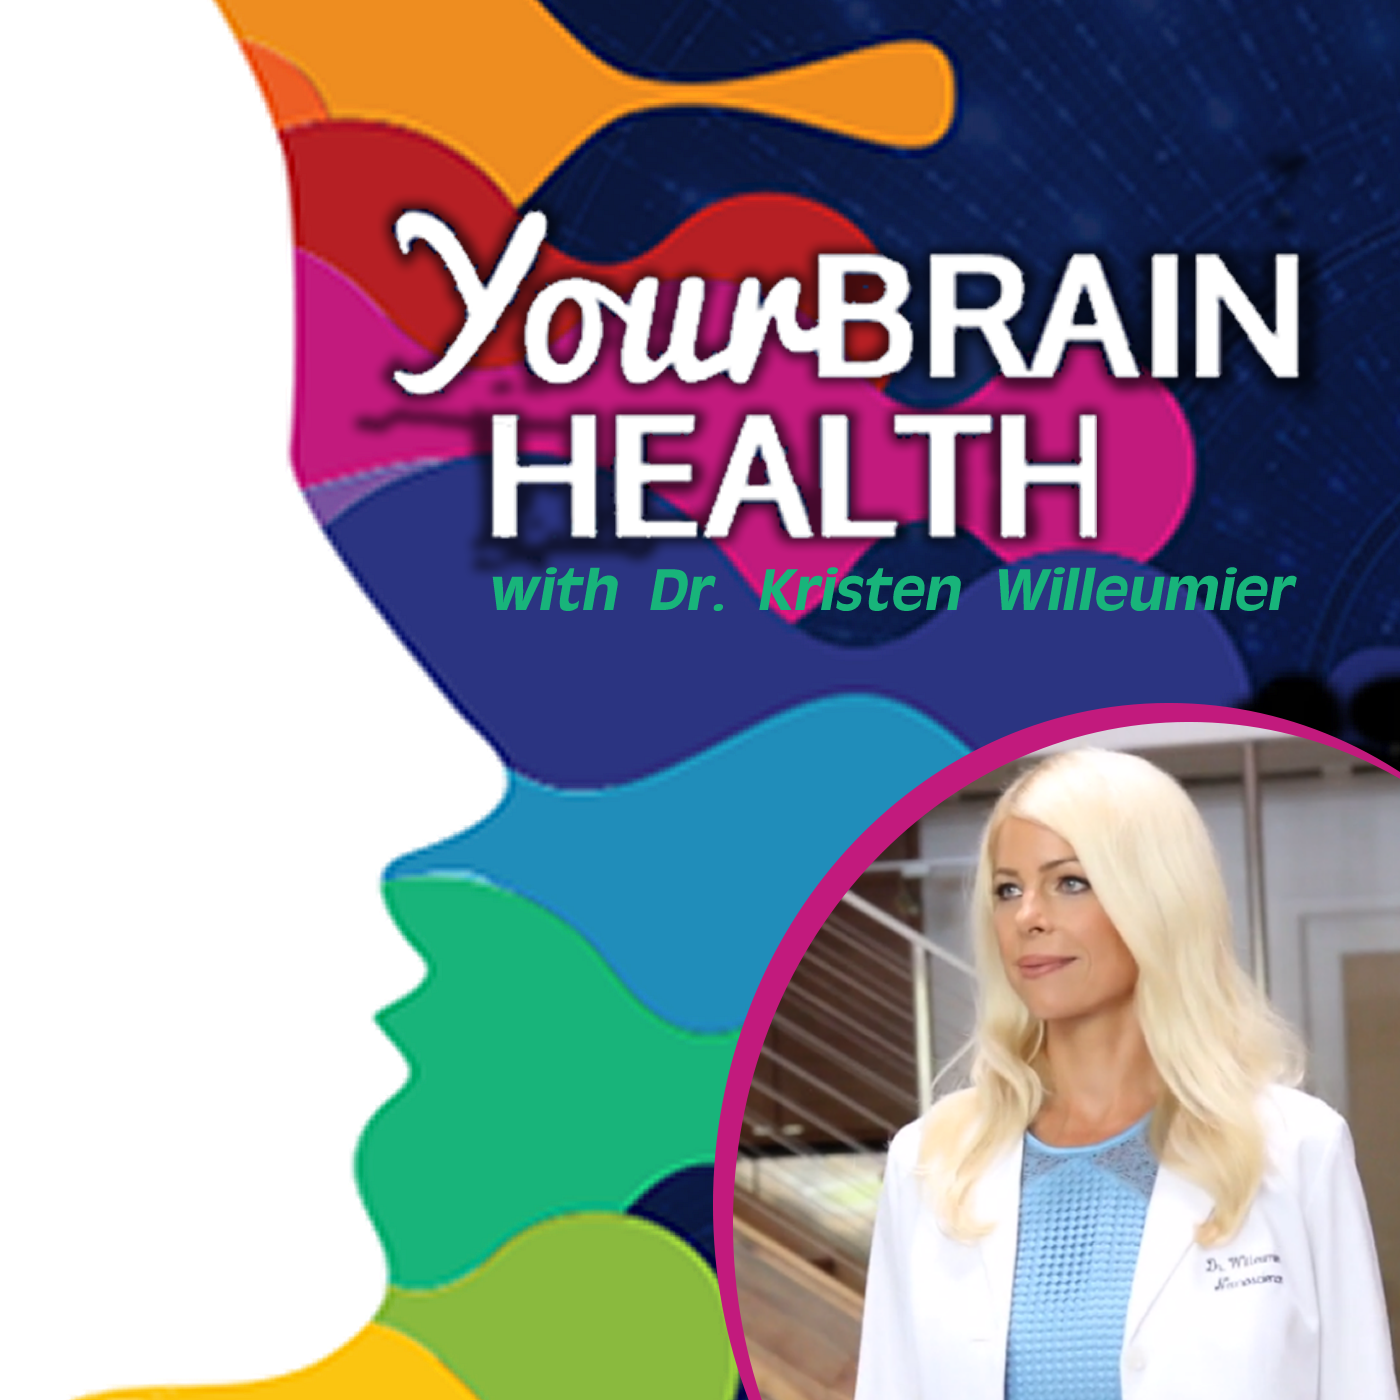 Your Brain Health with Dr. Kristen Willeumier